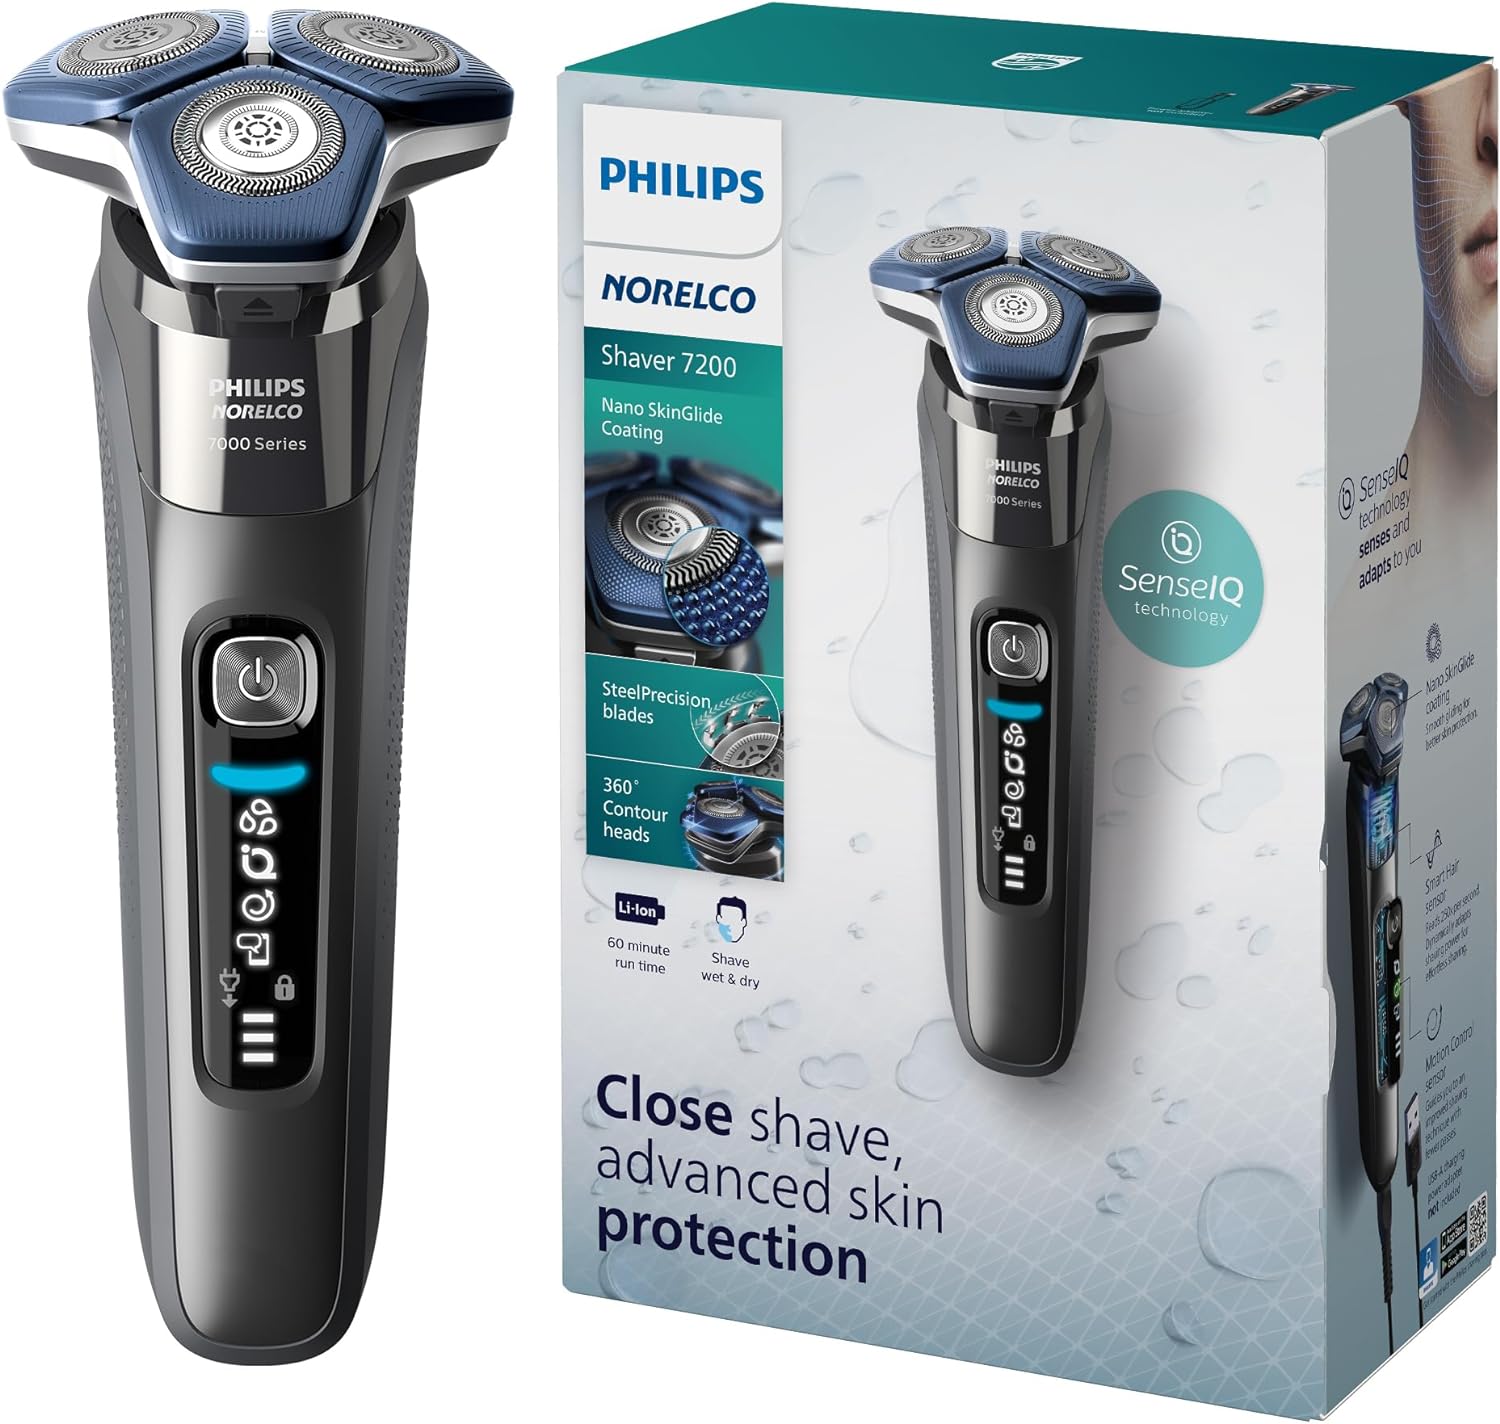 Philips Norelco Shaver 7200, Rechargeable Wet & Dry Electric Shaver
